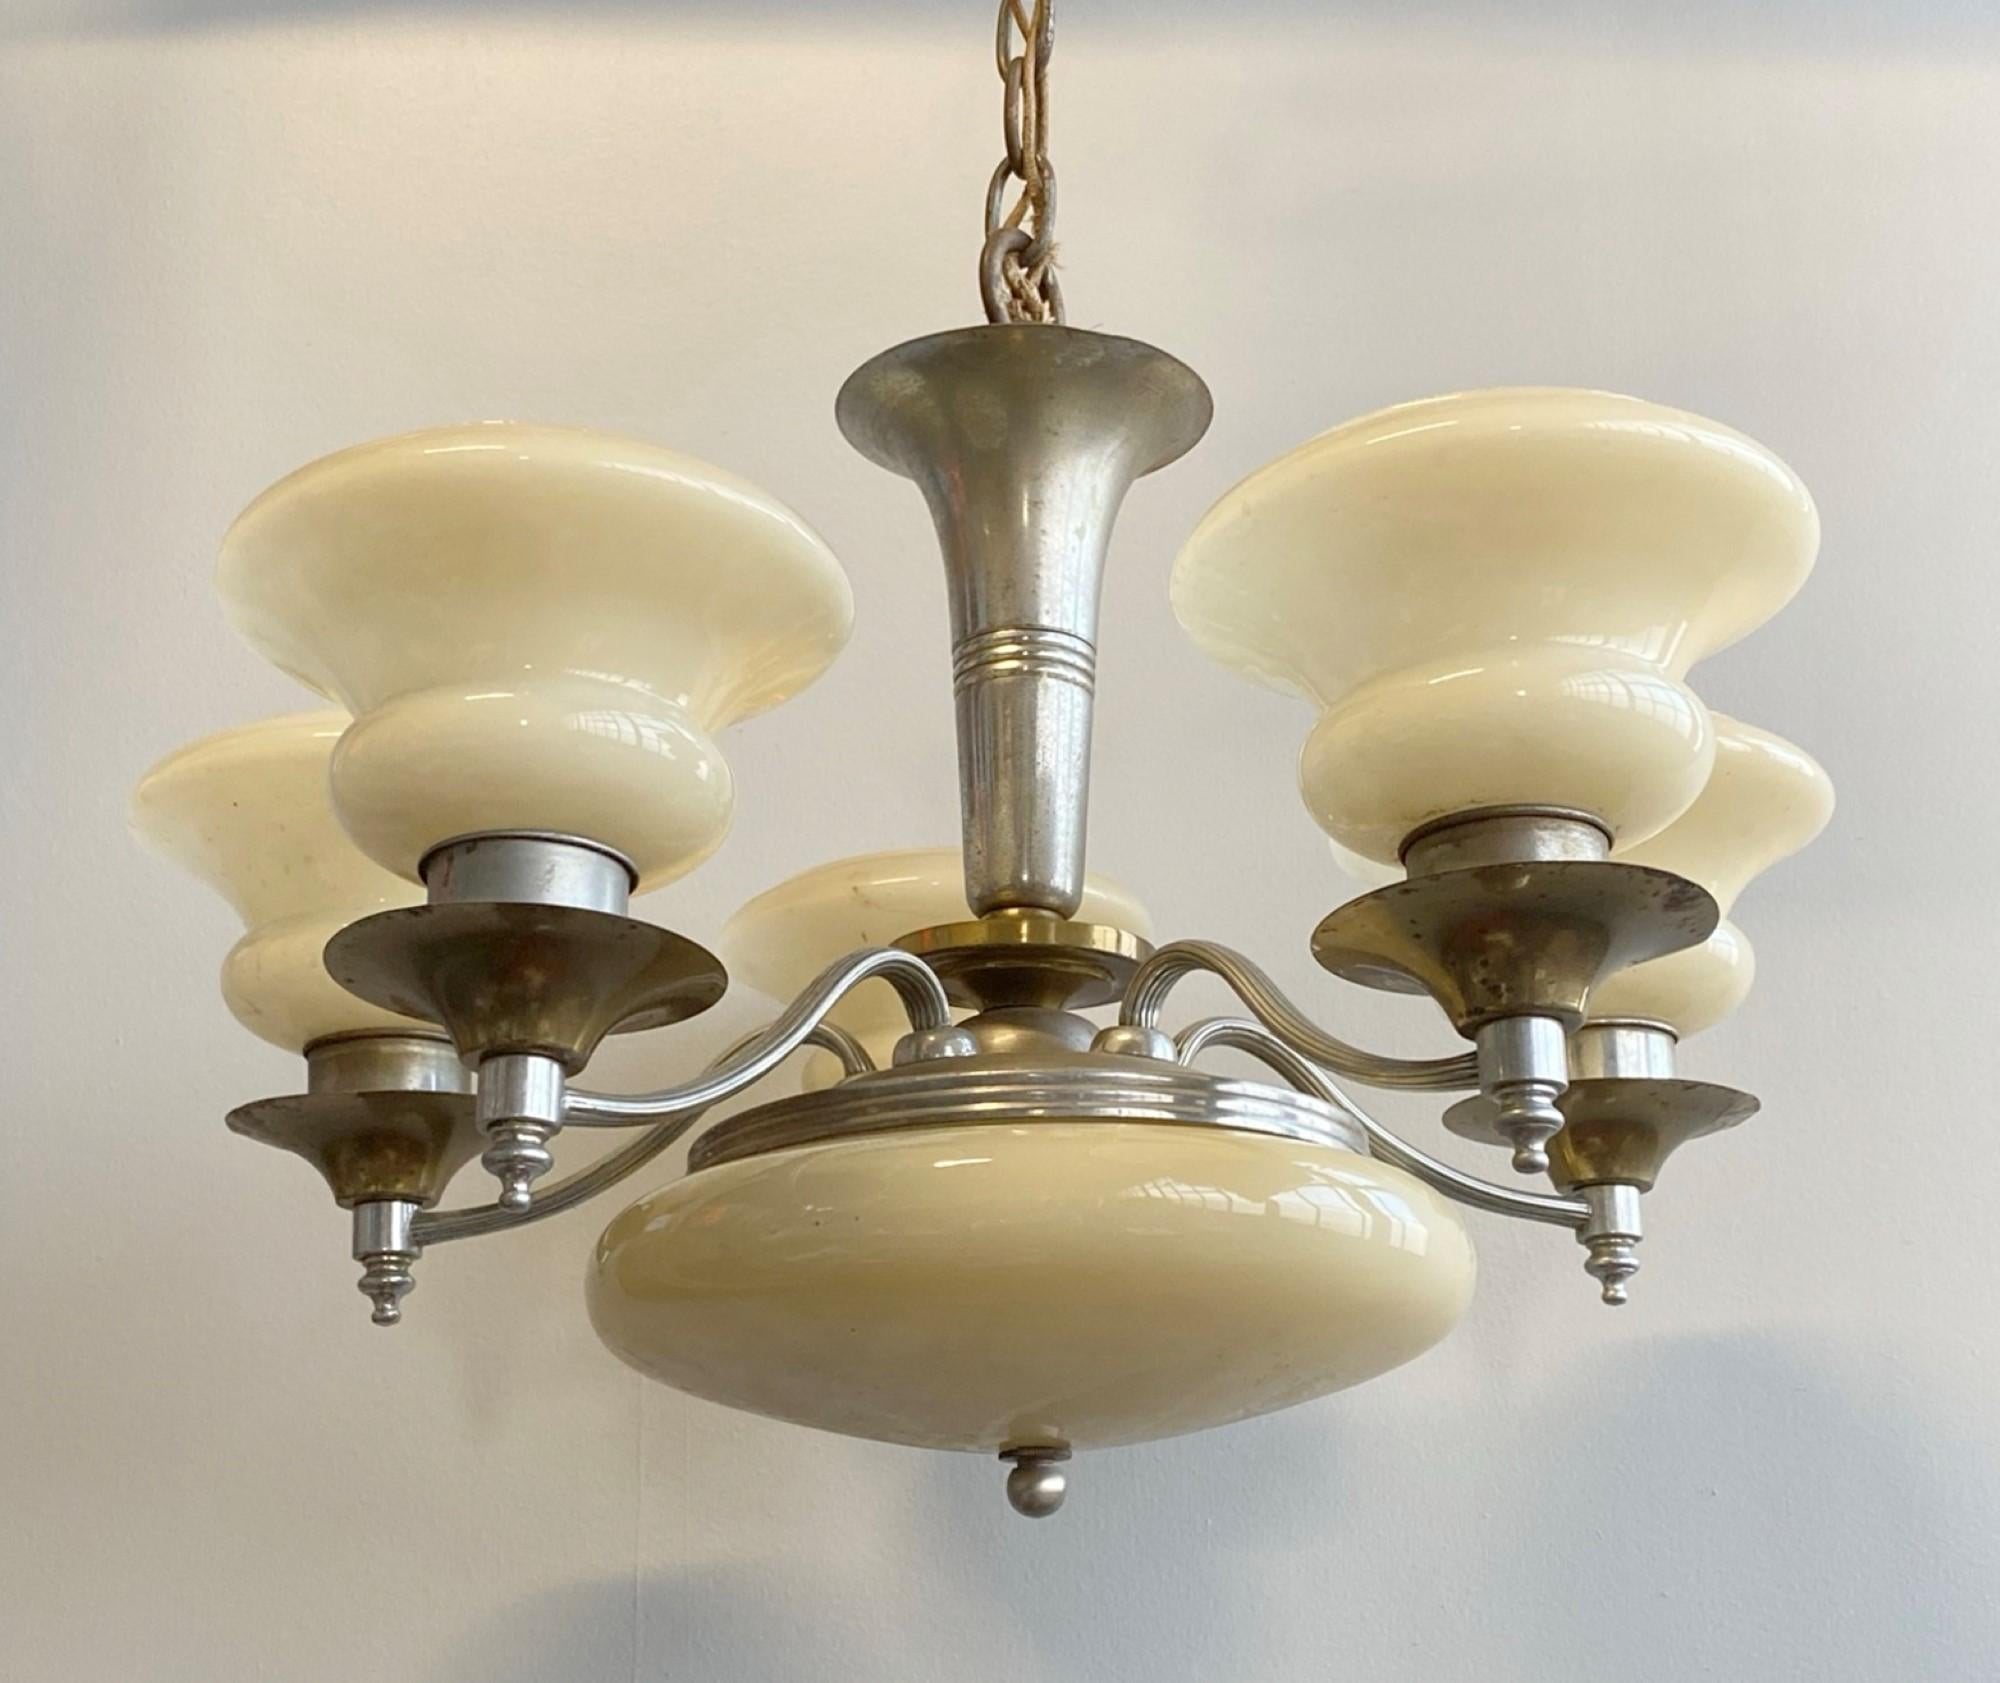 Early 20th century Art Deco nickel plated five arm chandelier with custard glass shades and matching illuminated bottom custard glass globe. Totaling seven lights, two in the bottom globe and one in each arm. Cleaned and rewired. Please note, this